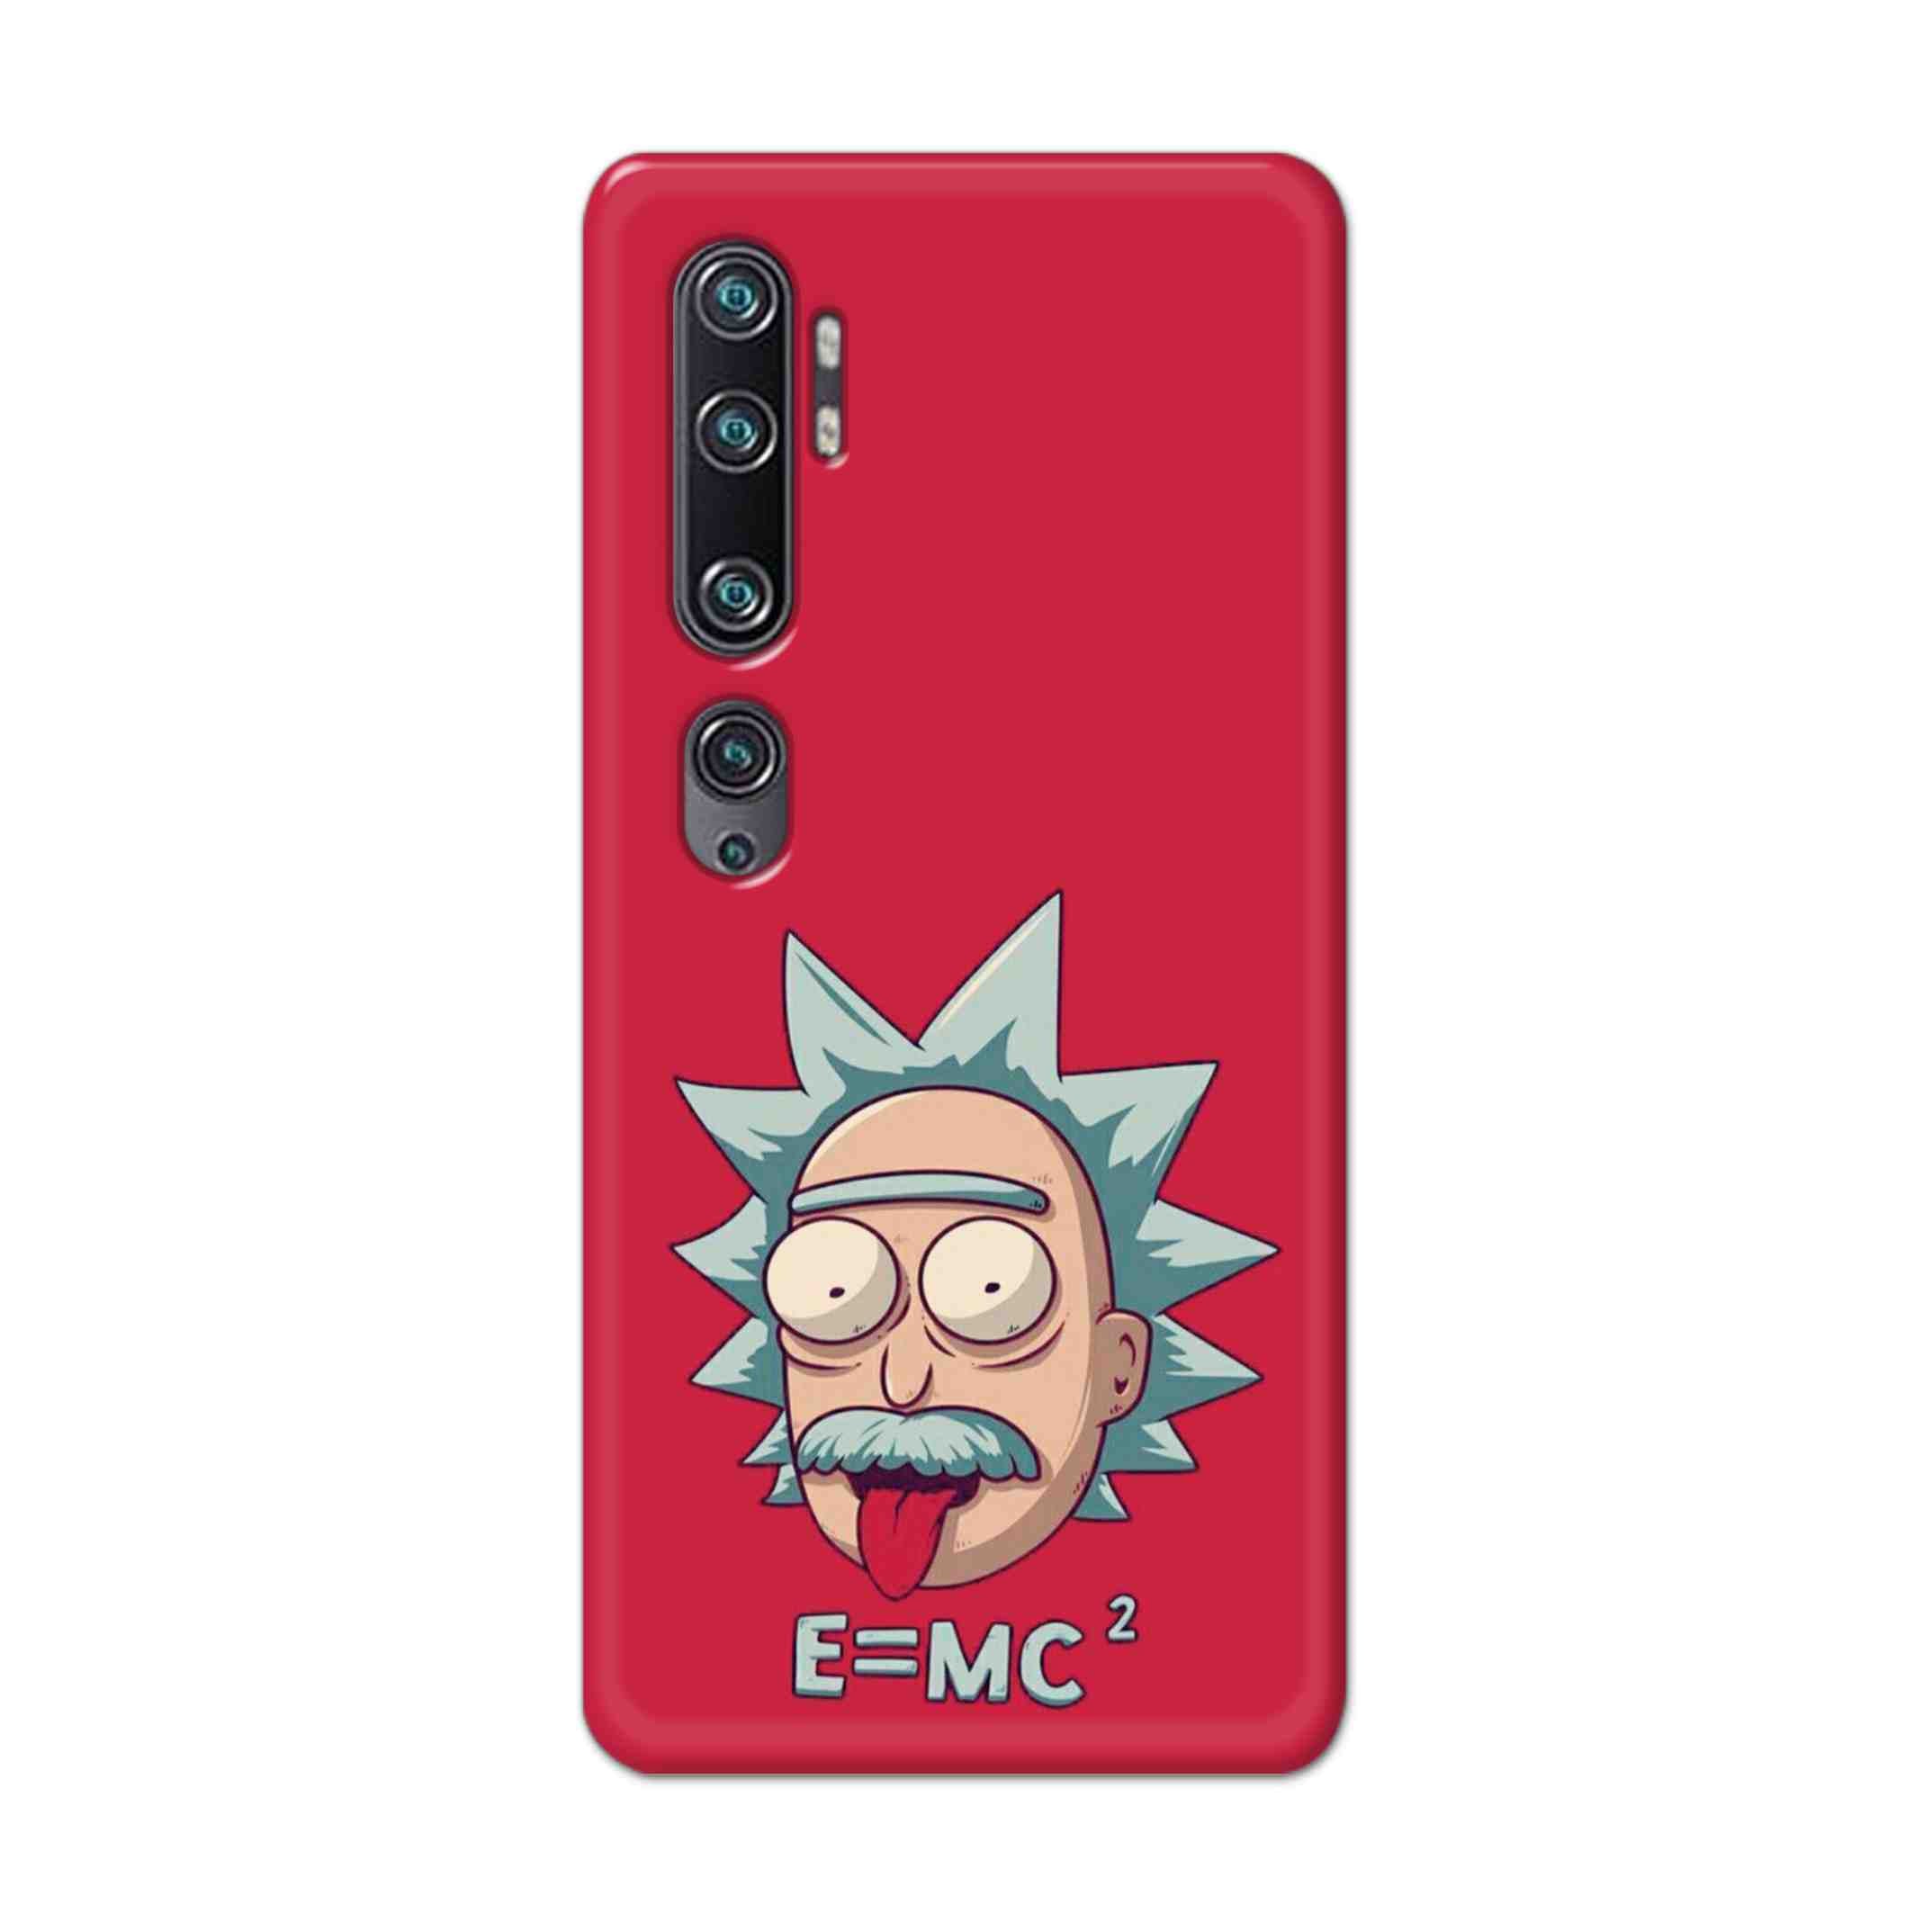 Buy E=Mc Hard Back Mobile Phone Case Cover For Xiaomi Mi Note 10 Online